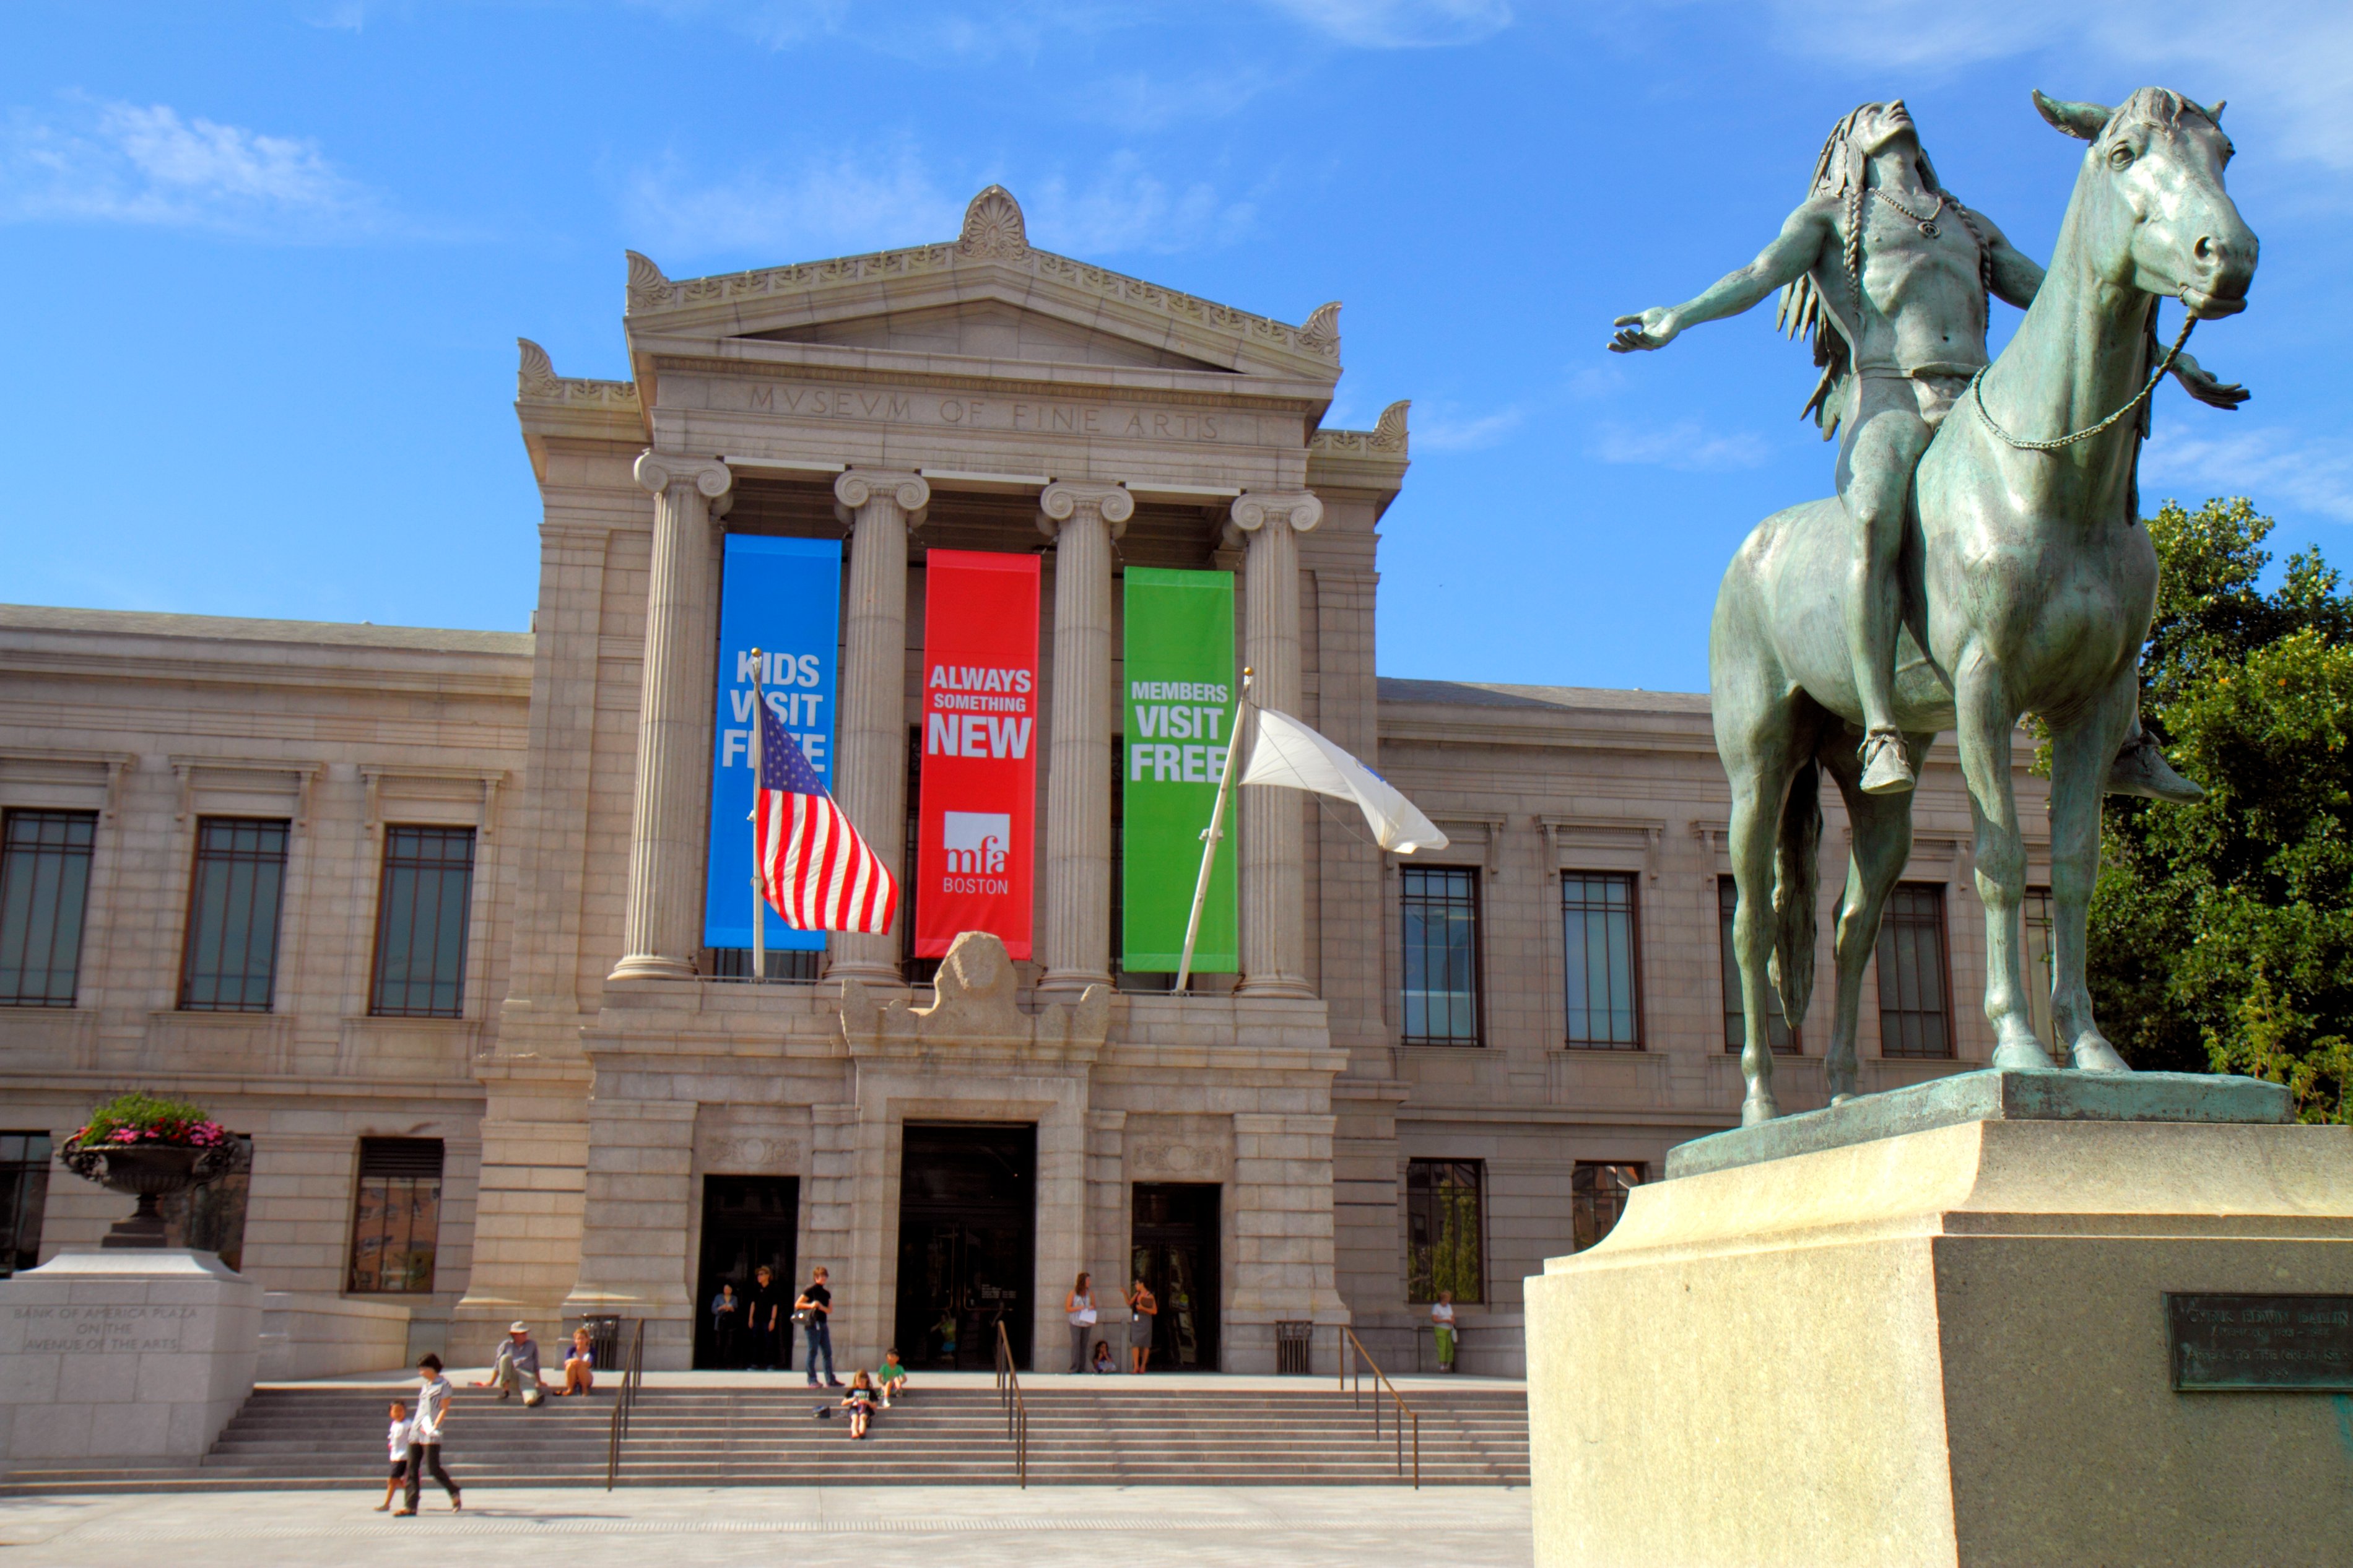 The Museum of Fine Arts in Boston. Photo: Jeffrey Greenberg/UIG via Getty Images.